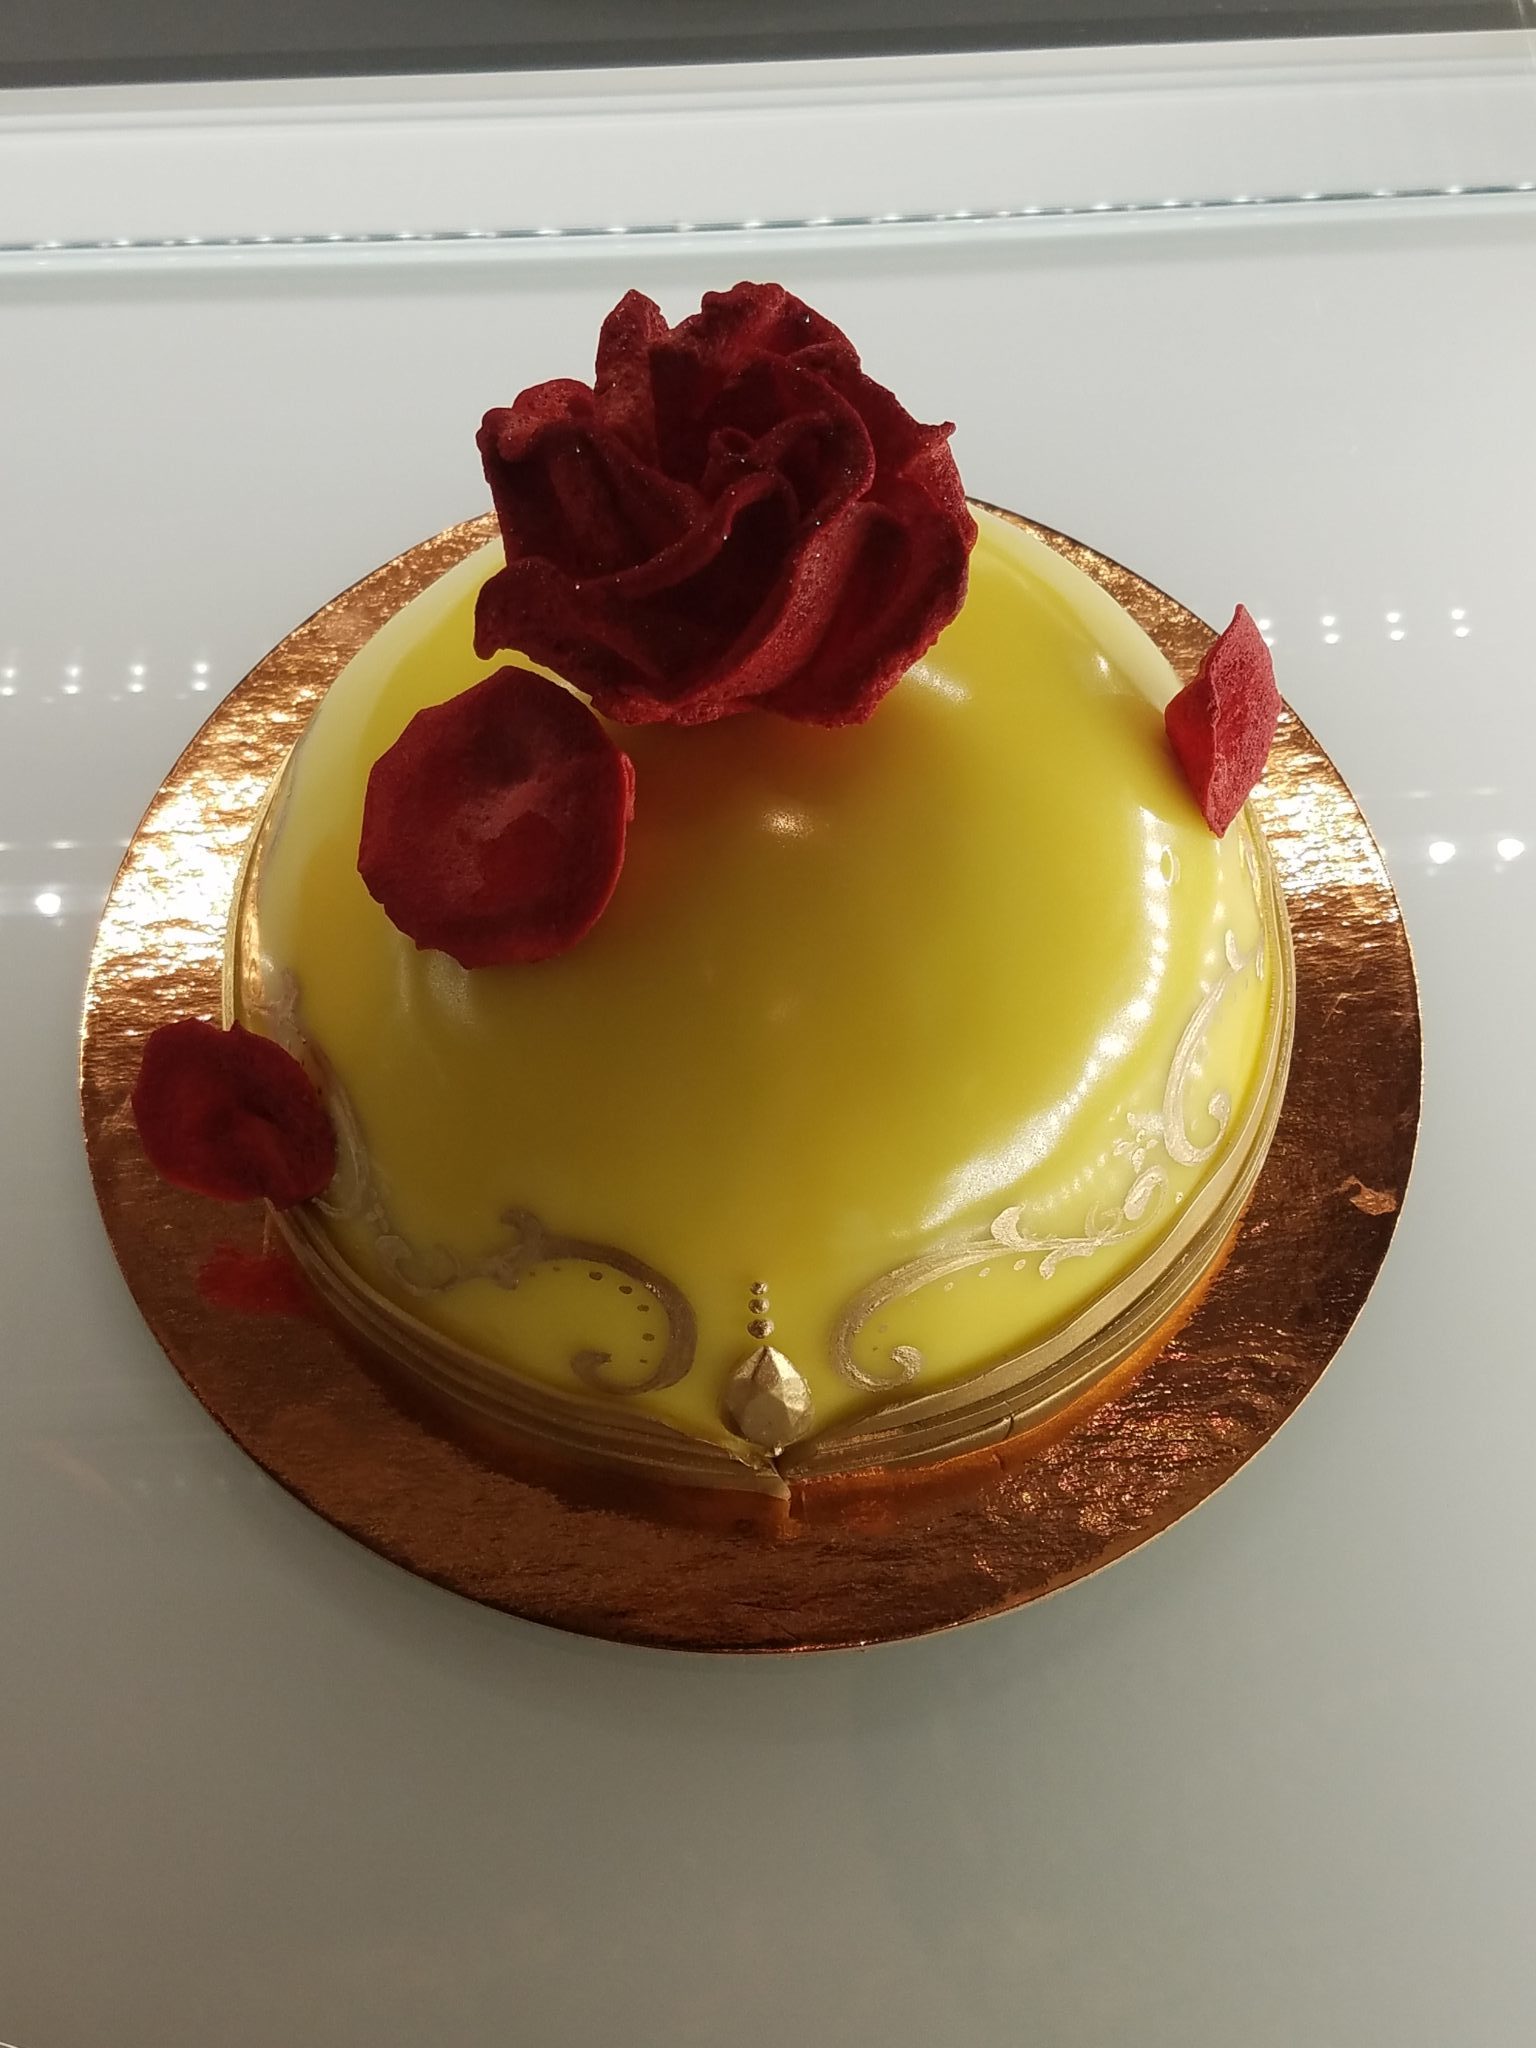 Beauty & The Beast Themed Sweets Now Appearing at Disney Springs